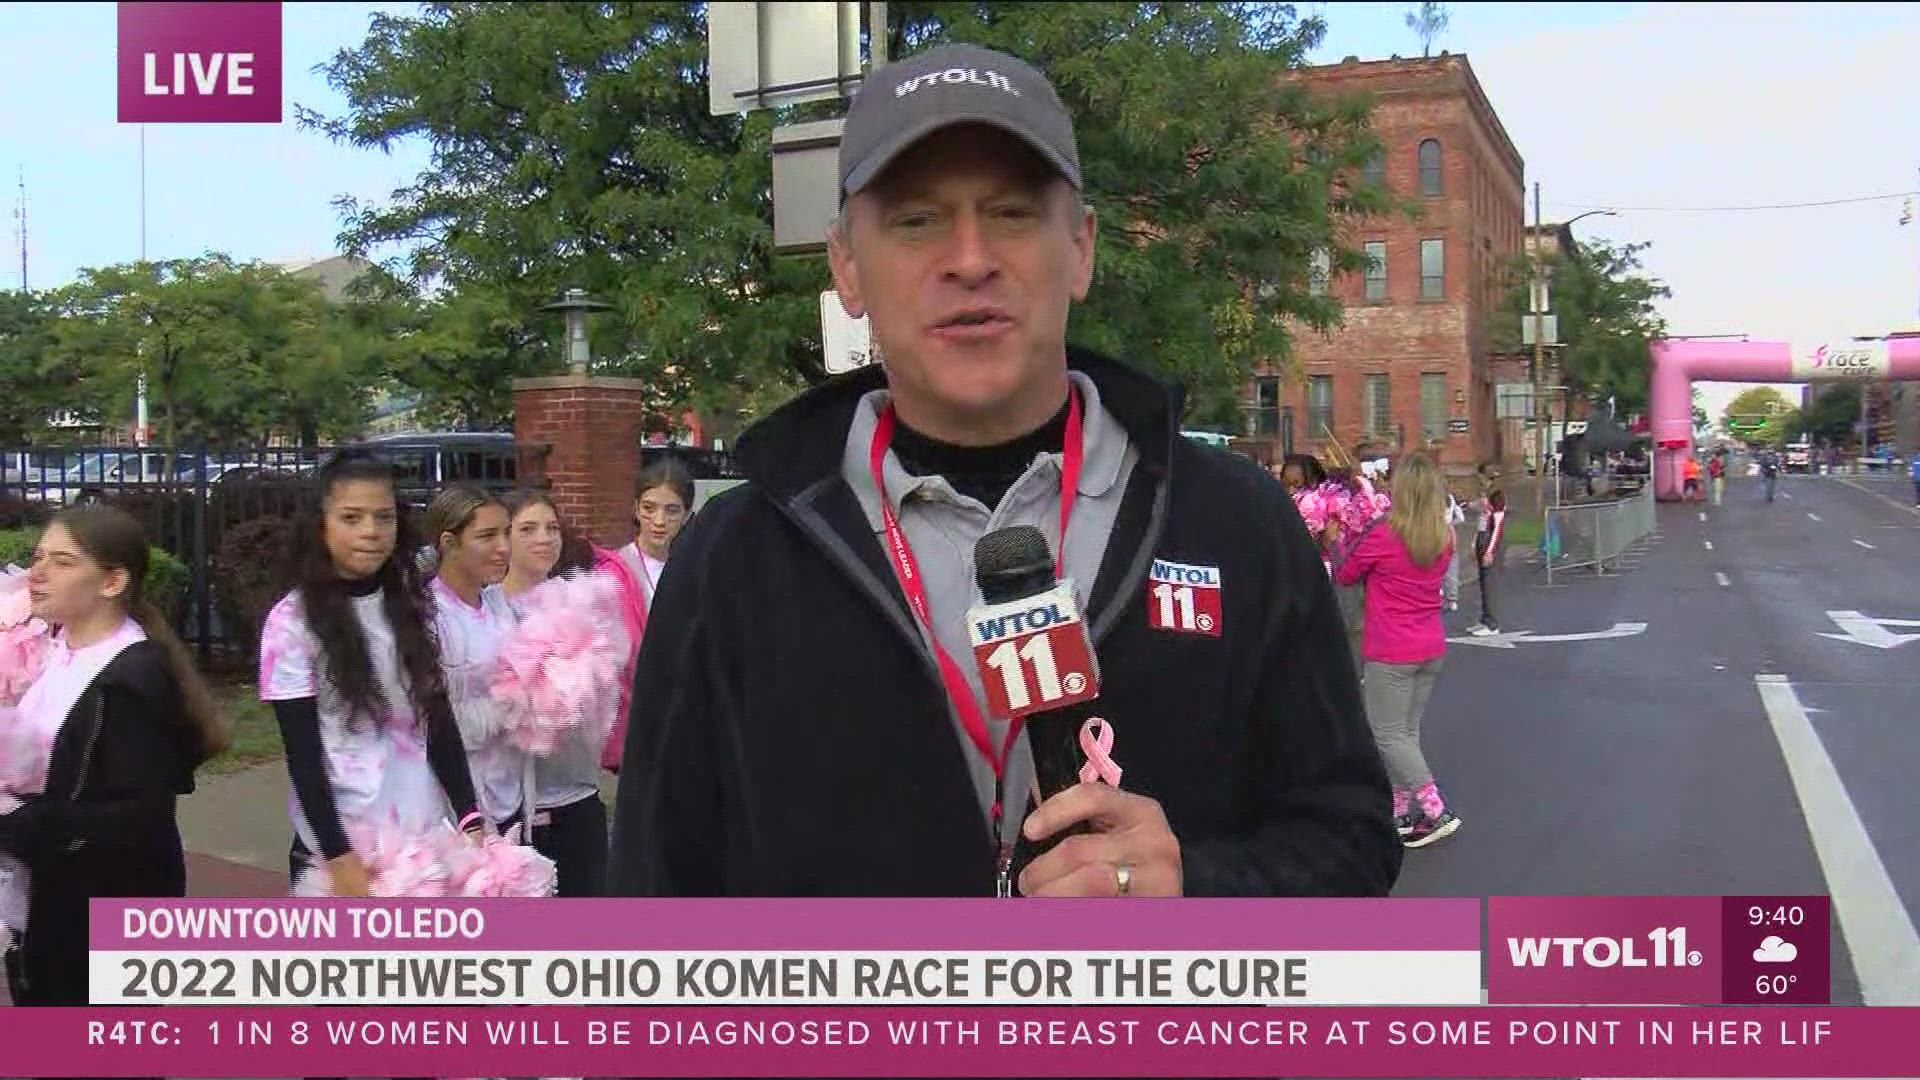 Thousands of people gathered in downtown Toledo on Sunday morning for the 29th Susan G. Komen Northwest Ohio Race for the Cure.